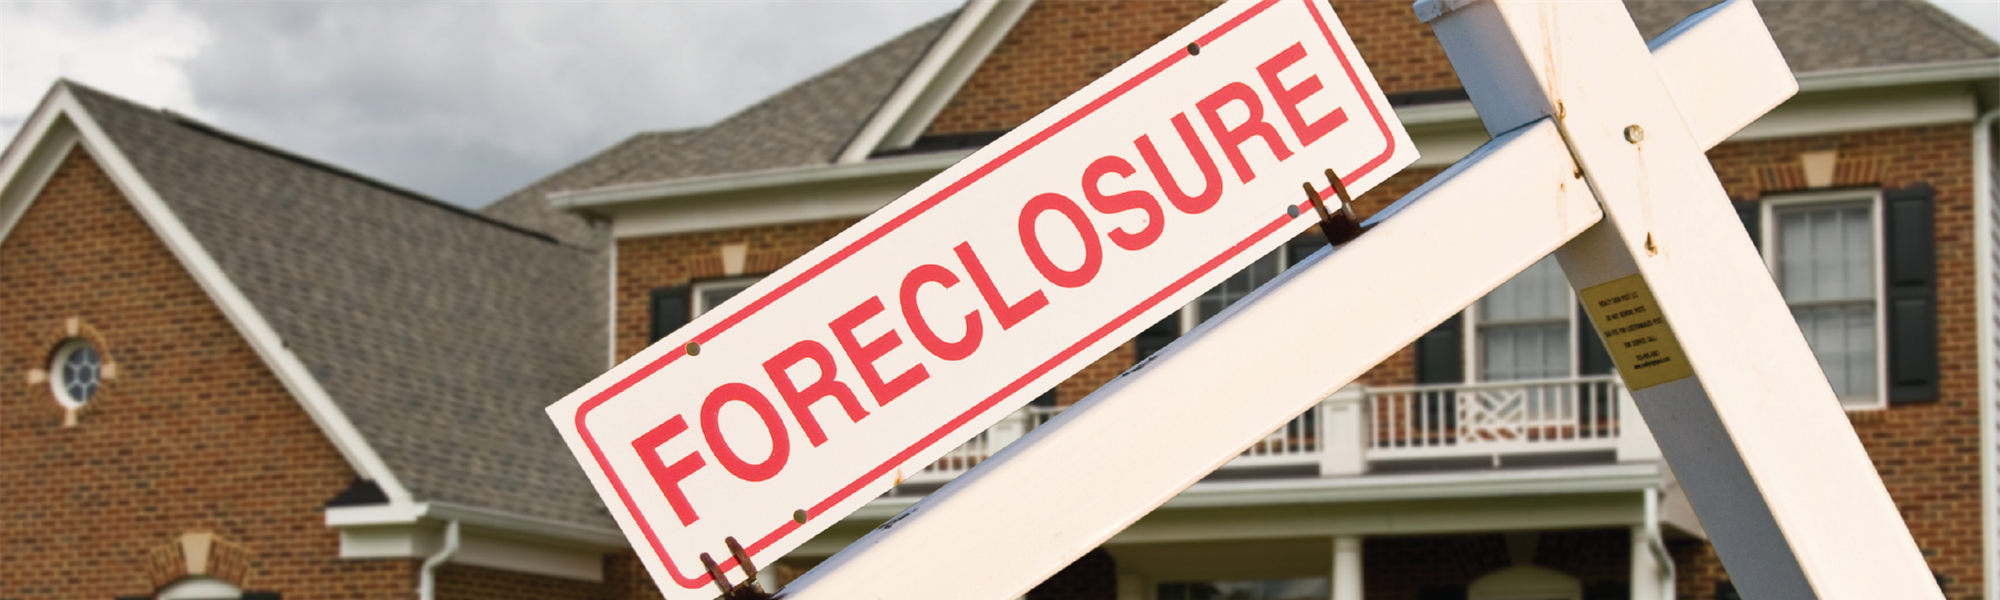 Basic Bankruptcy for Realtors and Foreclosures and REO Sales